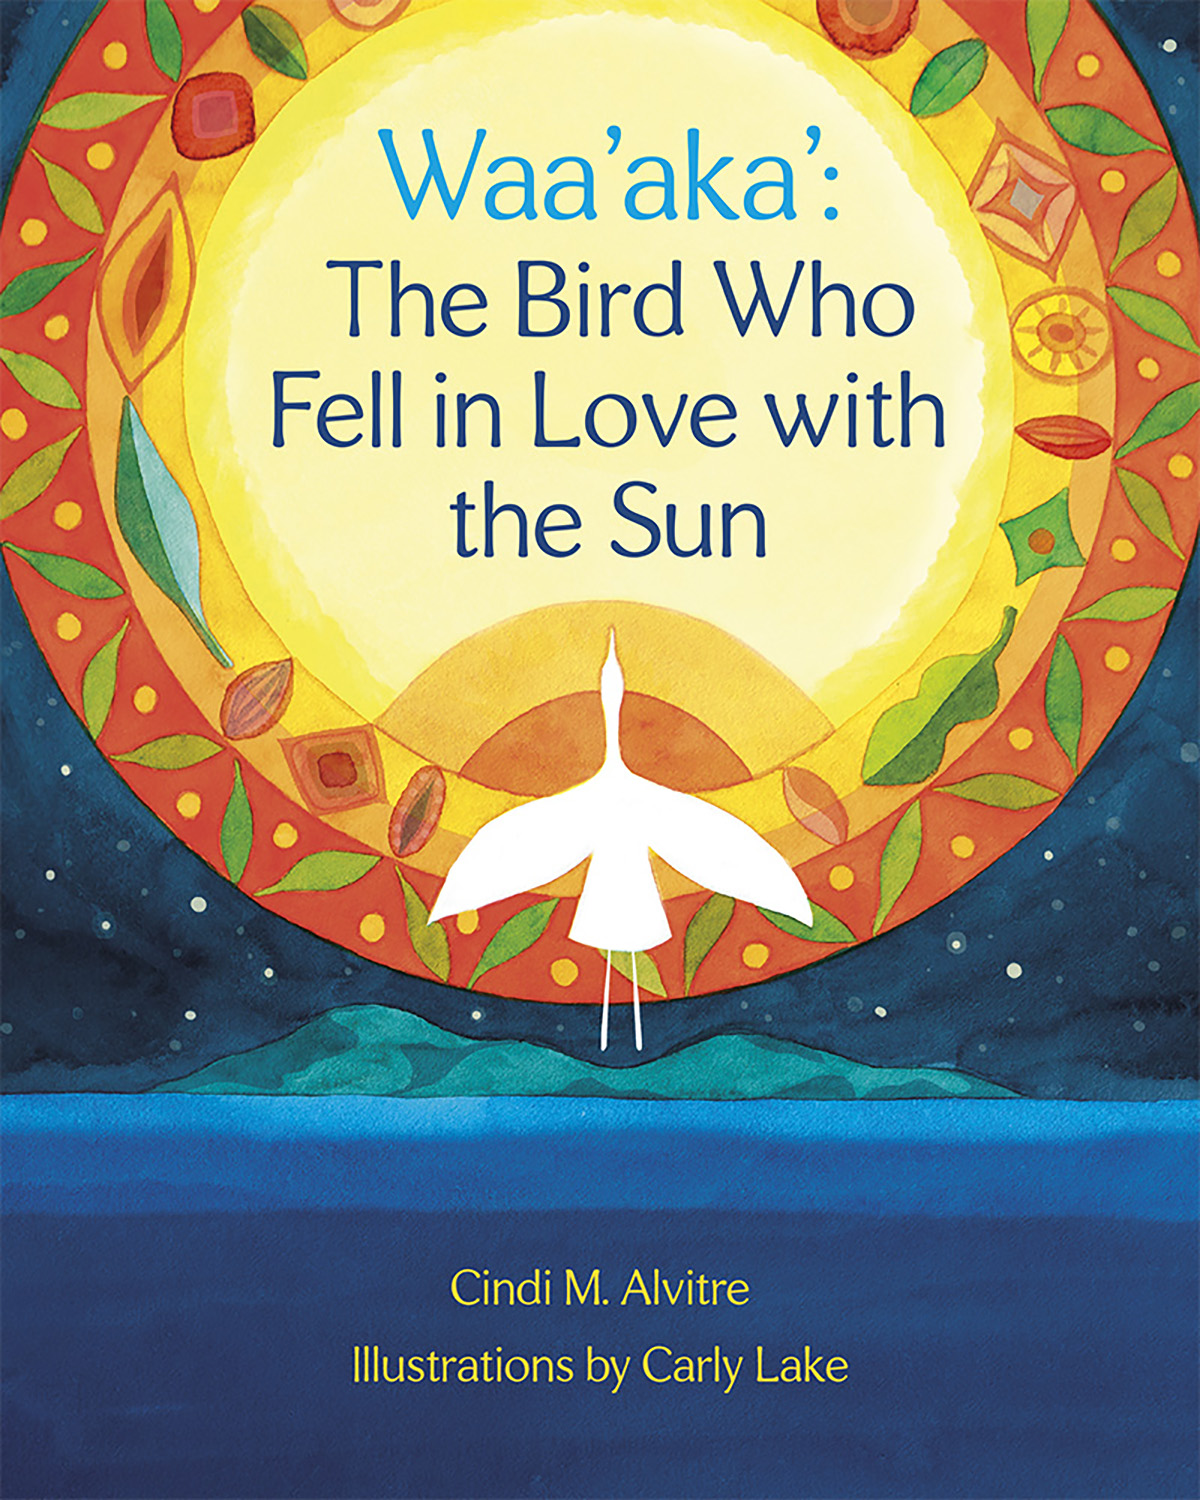 photo of a book titled Waa'aka': The Bird Who Fell in Love with the Sun